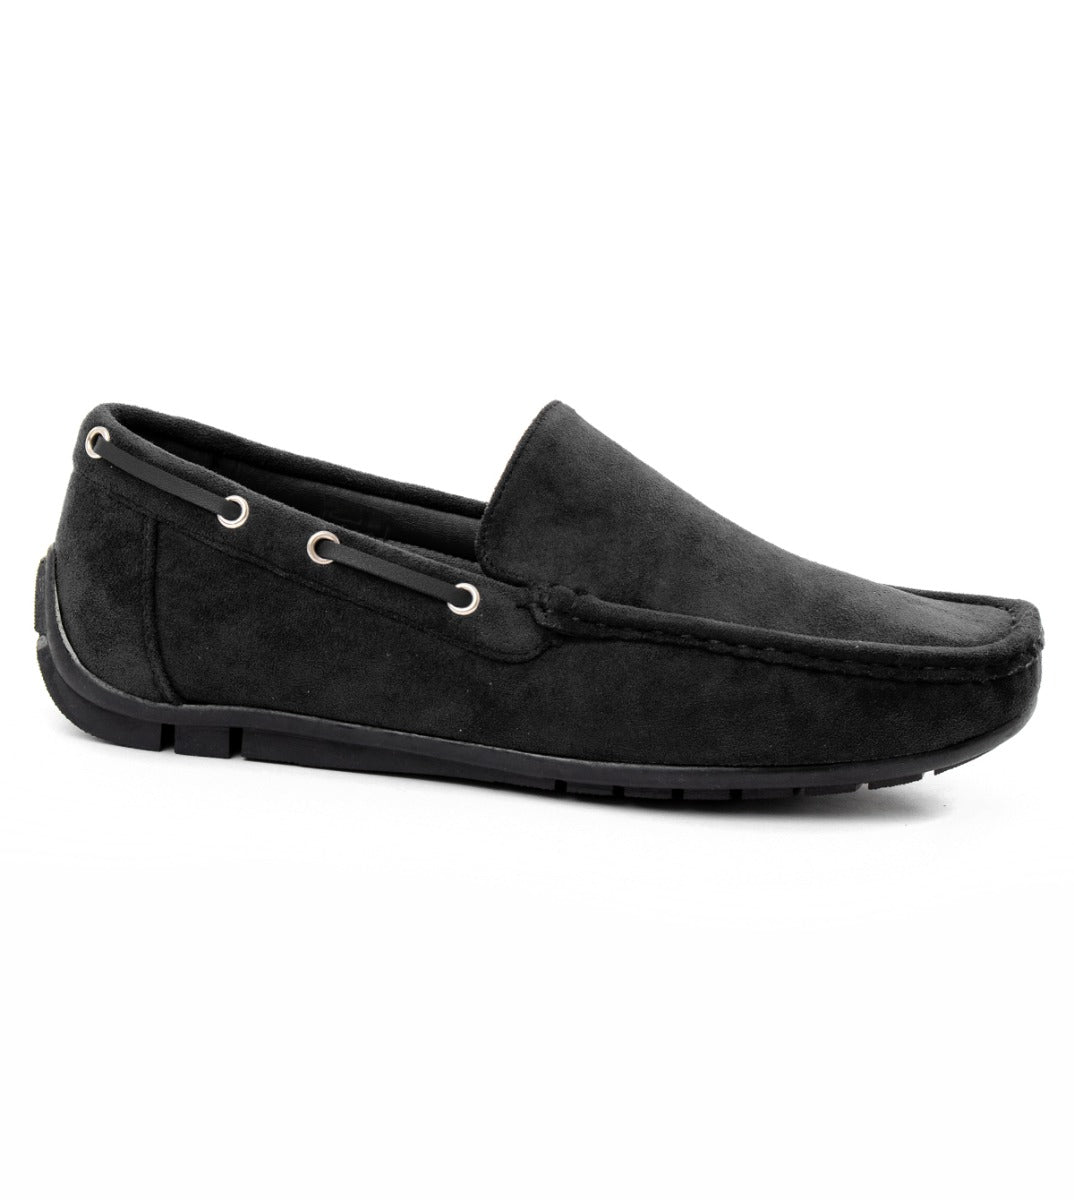 Men's Shoes Elegant Sporty Black Suede Loafers GIOSAL-S1122A